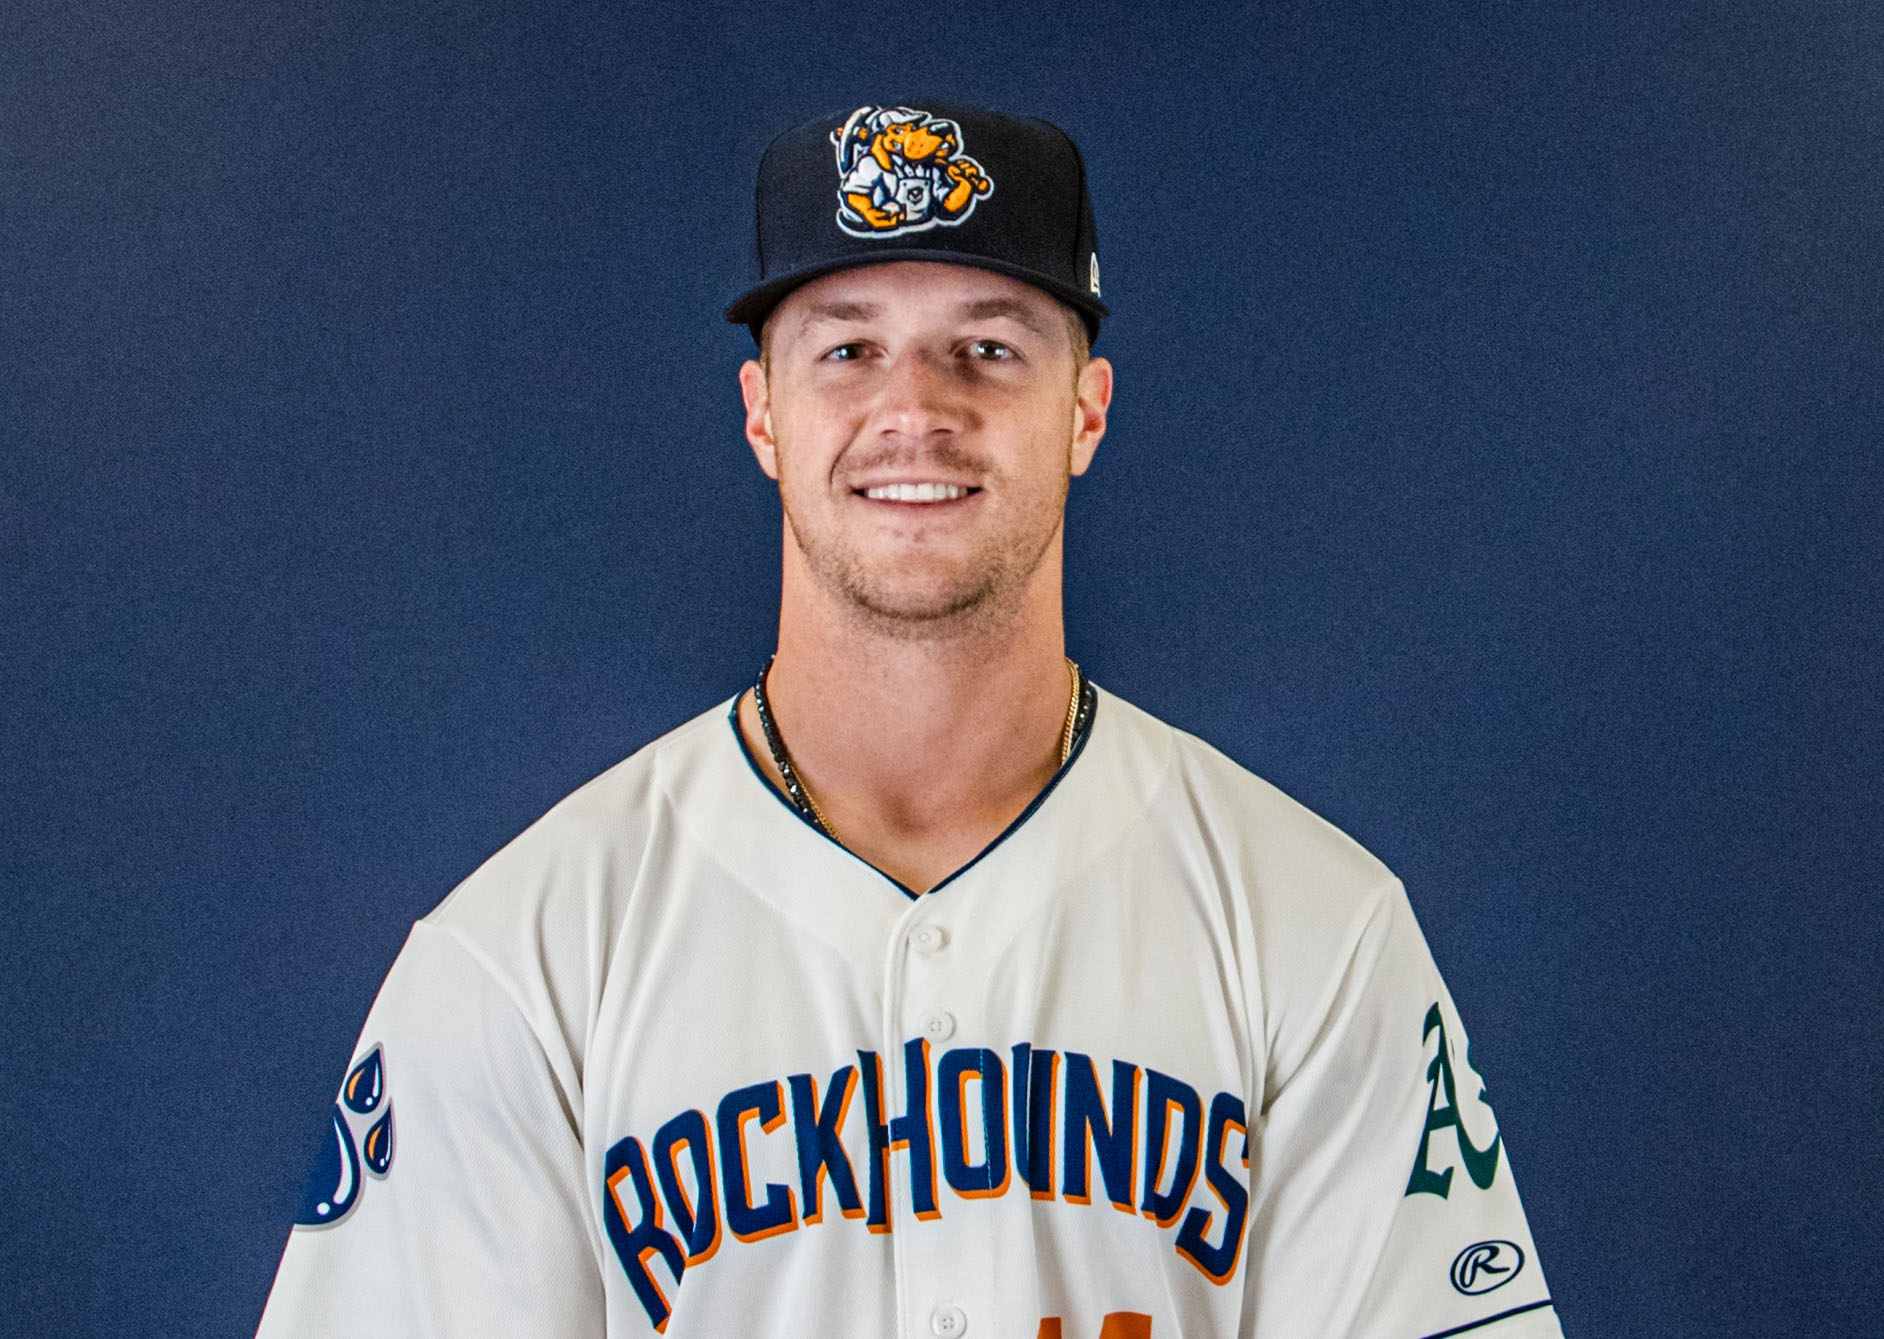 ROCKHOUNDS REPORT Midland holds off Missions for road win